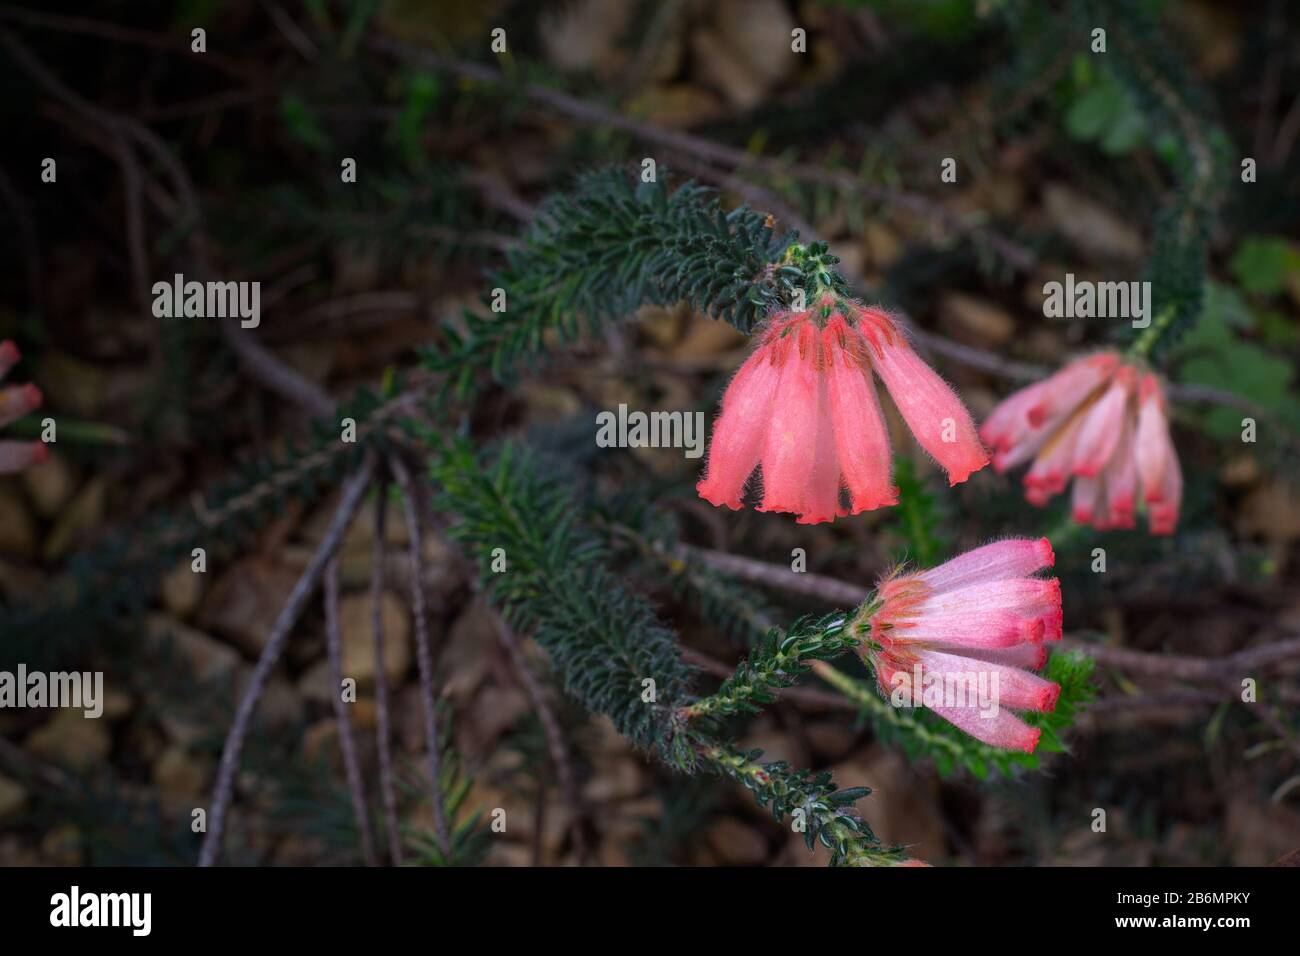 Erica cerinthoides, an evergreen heather native to South Africa, with beautiful  red-orange tubular flowers and a dark green foliage Stock Photo